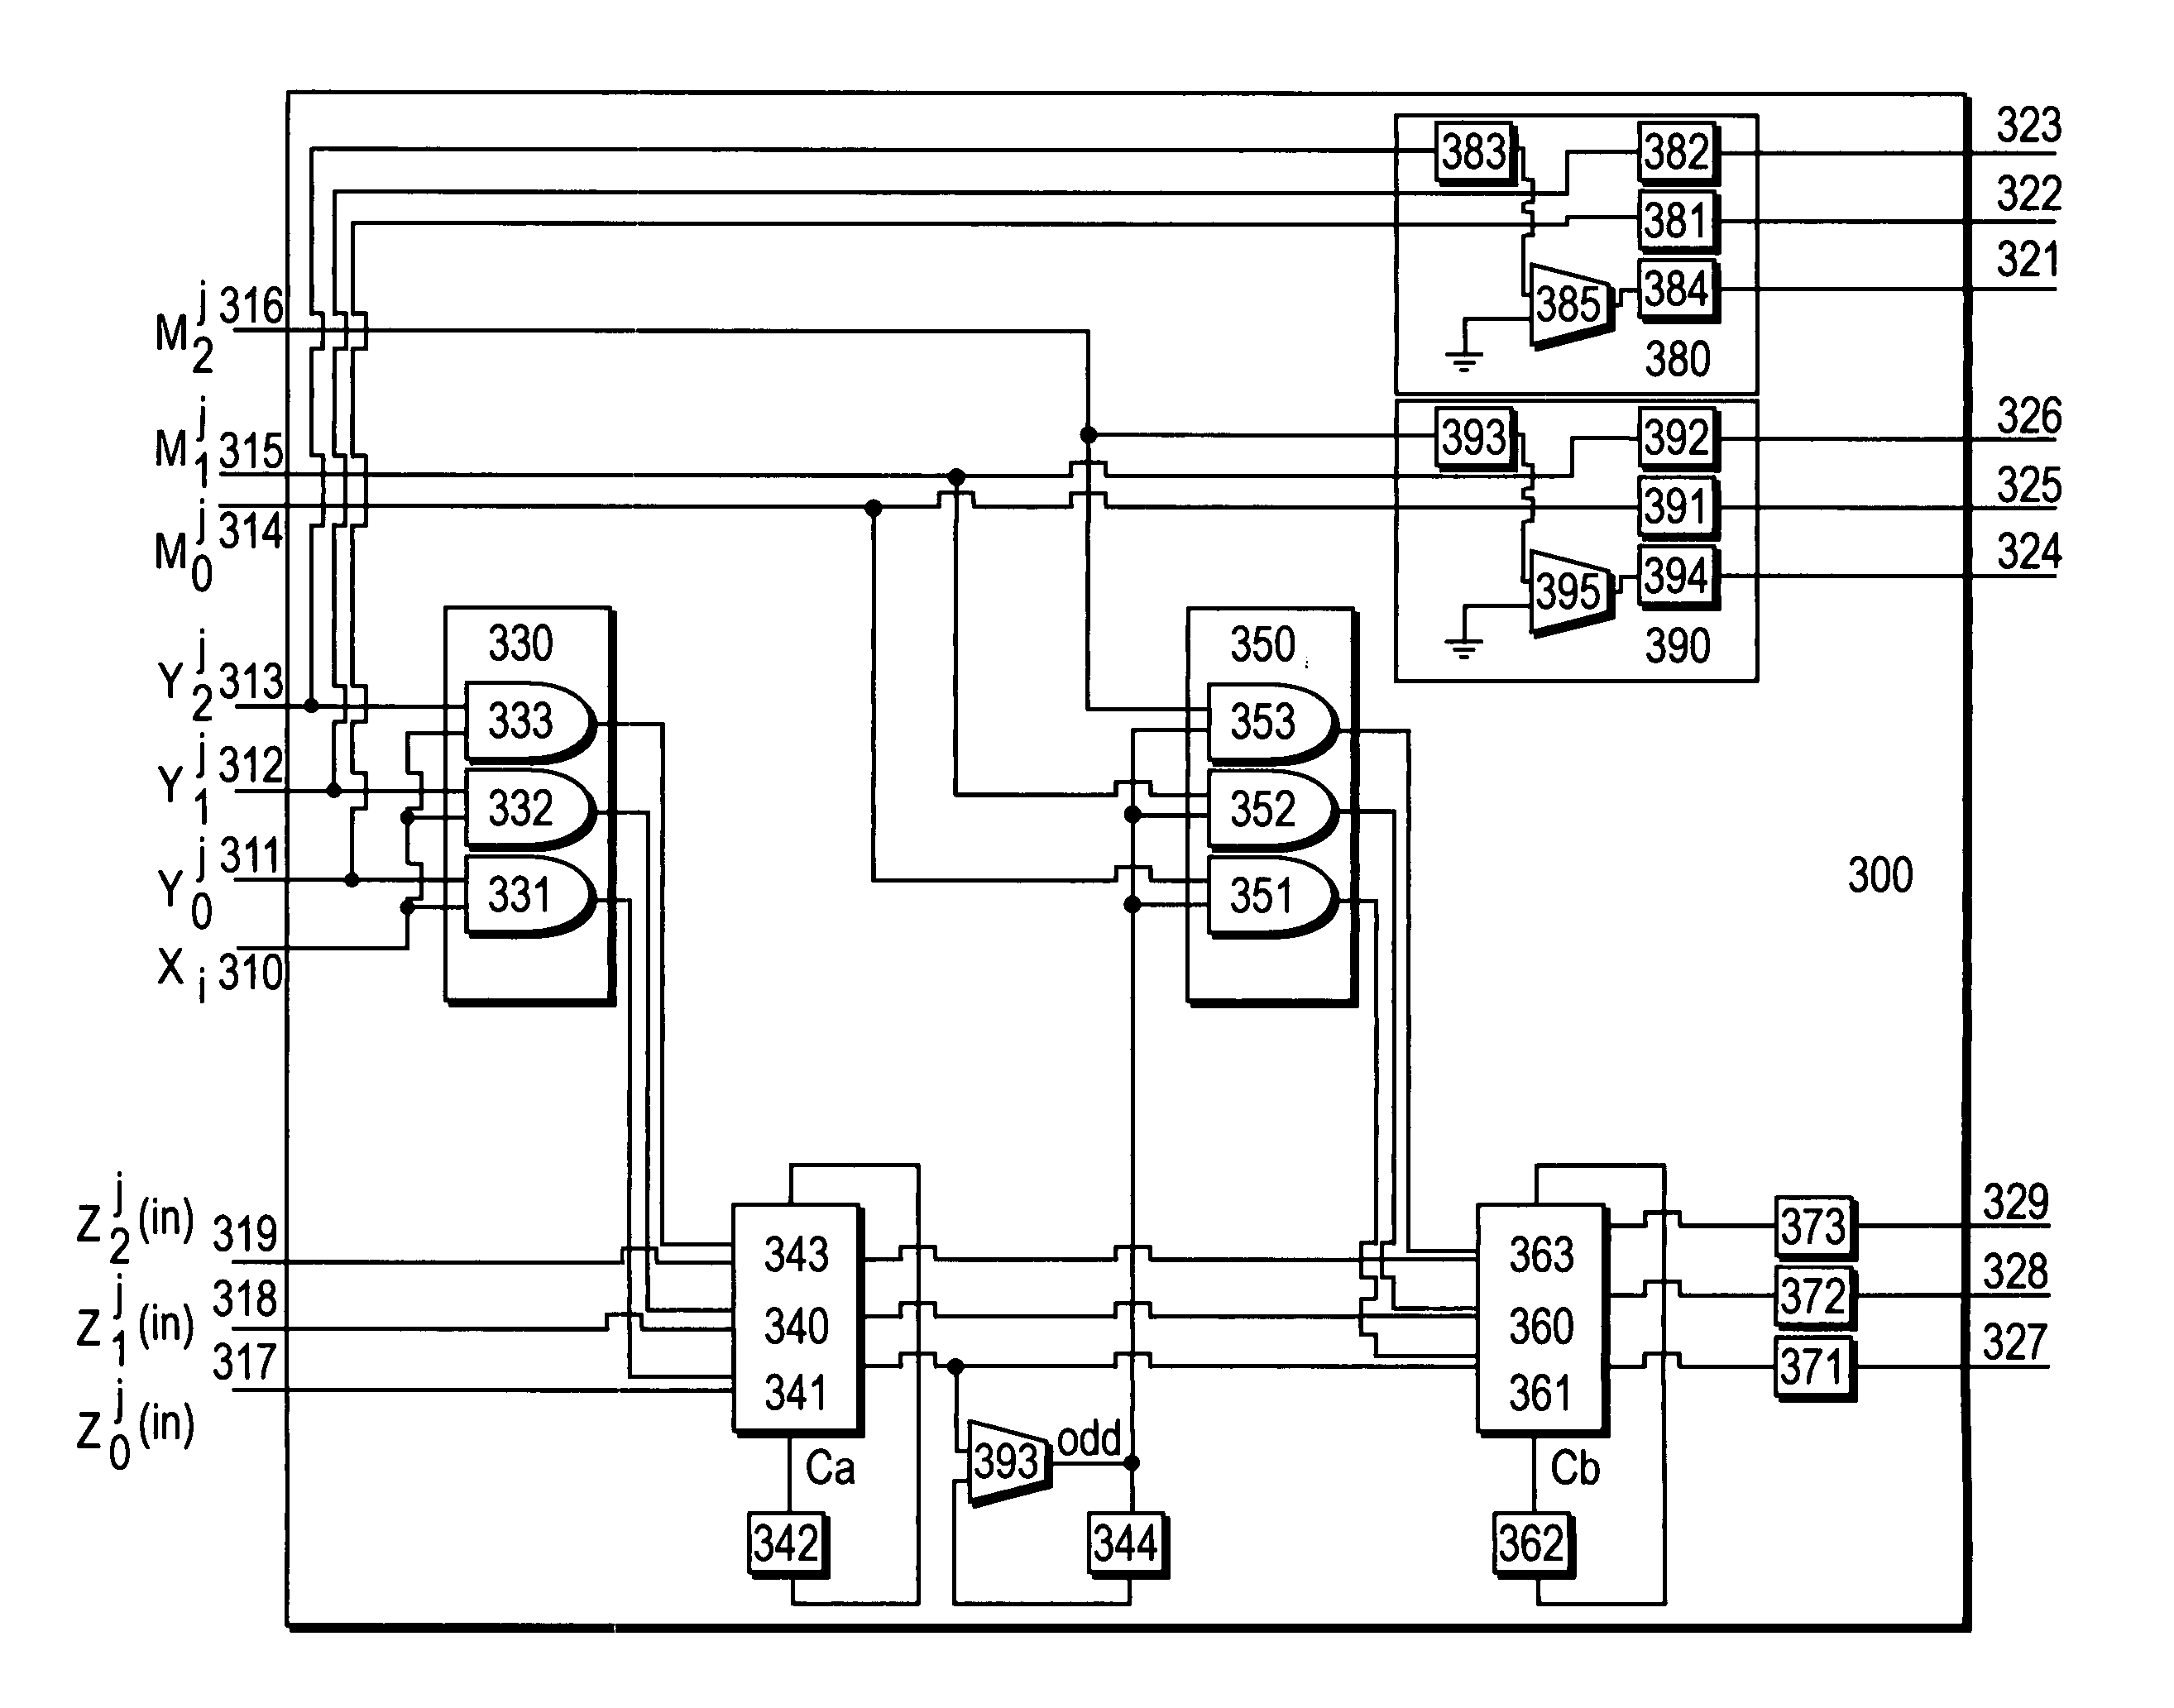 Multiplicand shifting in a linear systolic array modular multiplier